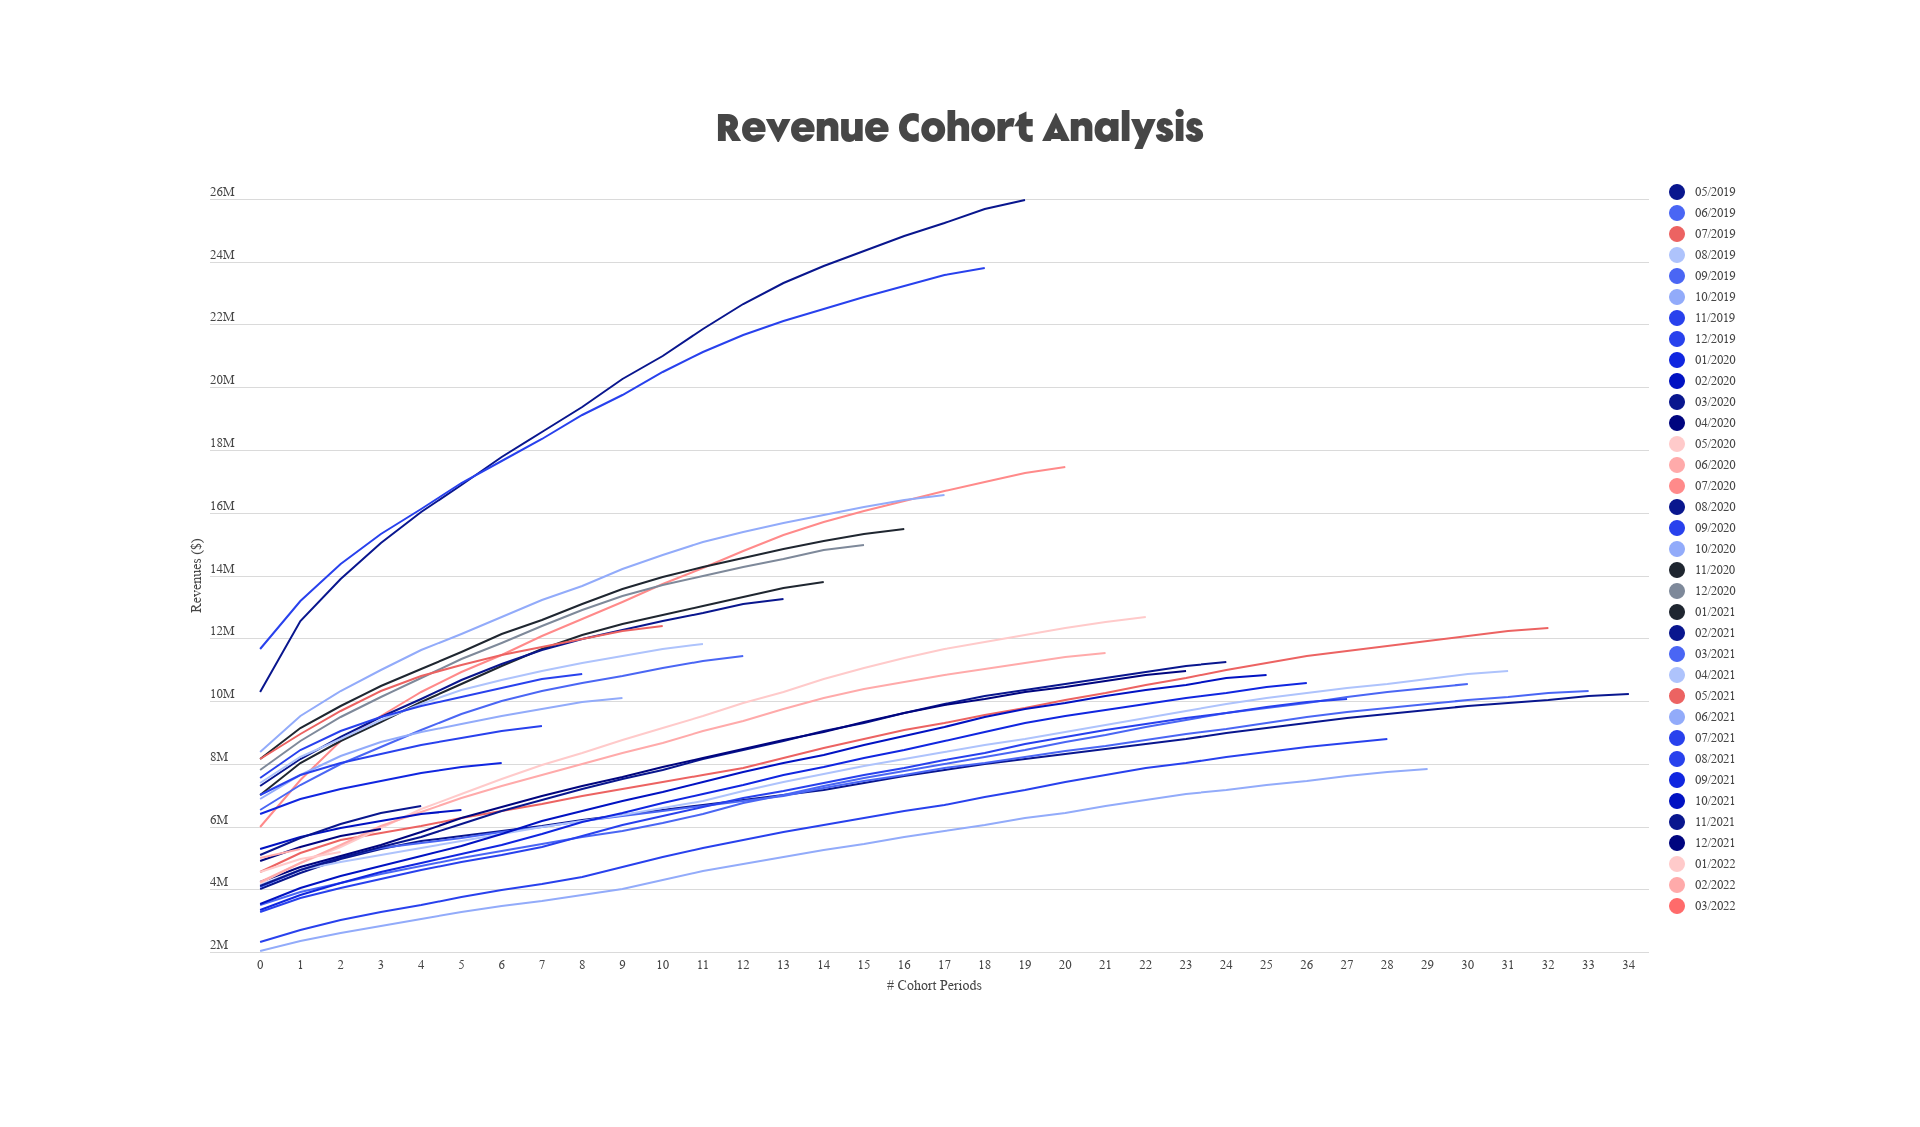 Revenue cohort analysis, May 2019 - March 2022